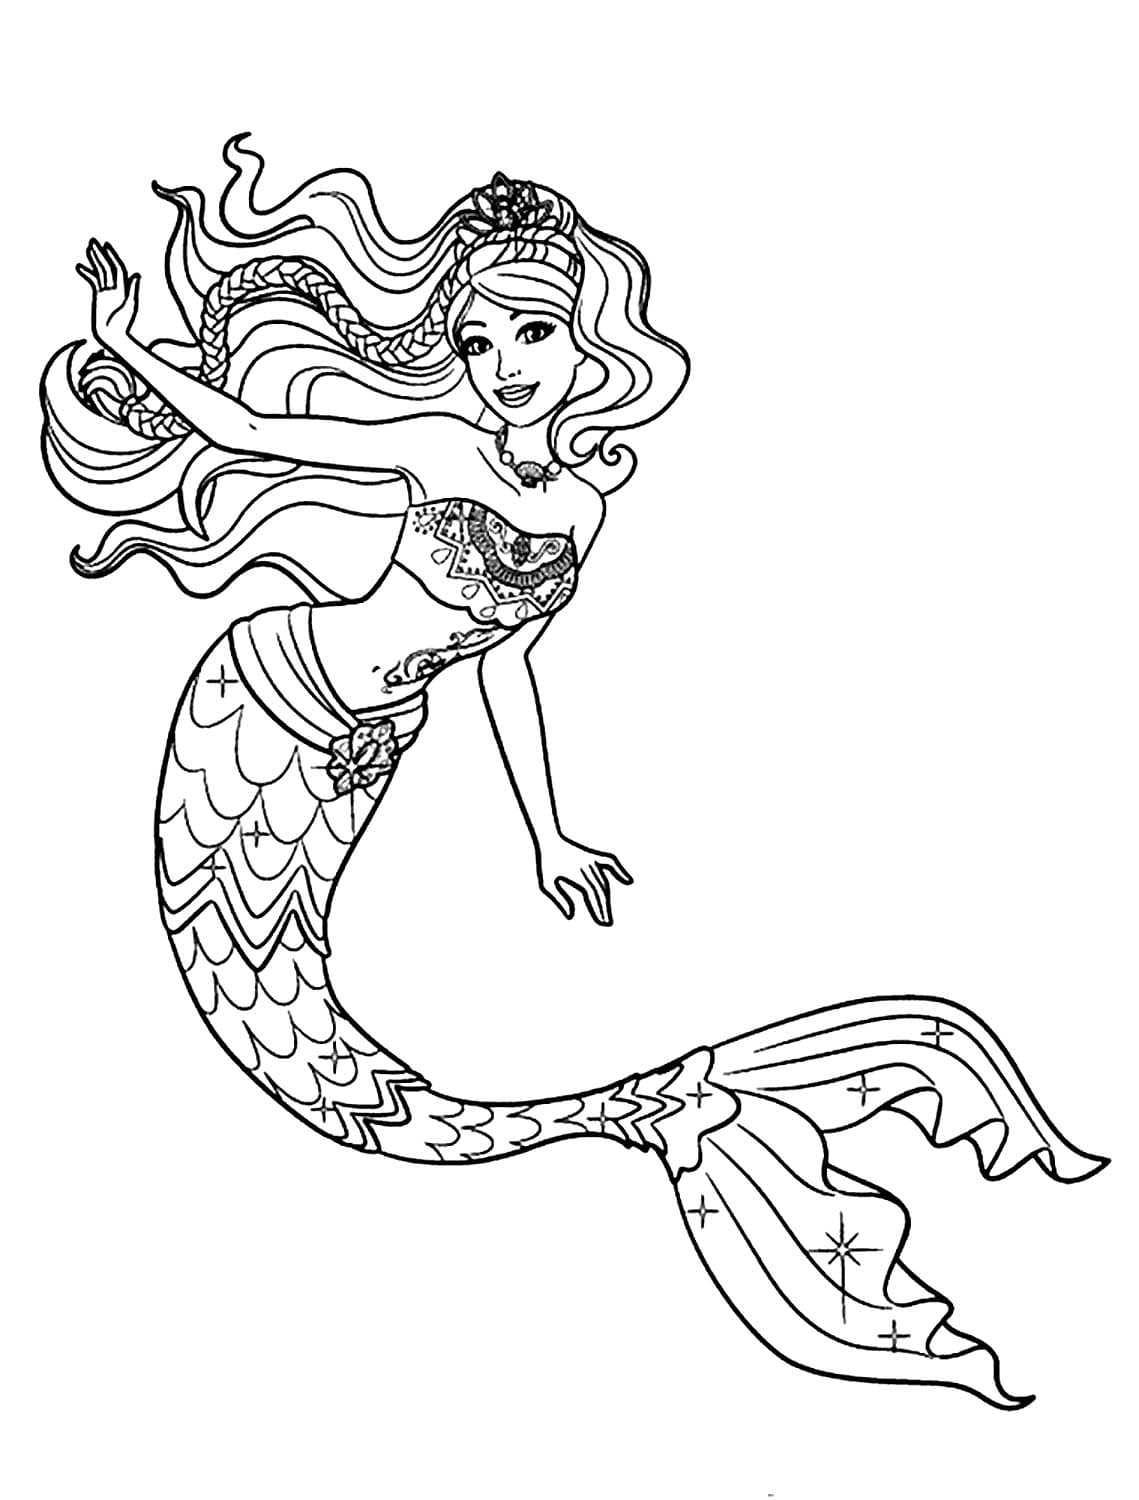 Coloring page Barbie Mermaid Barbie in fashionable clothes